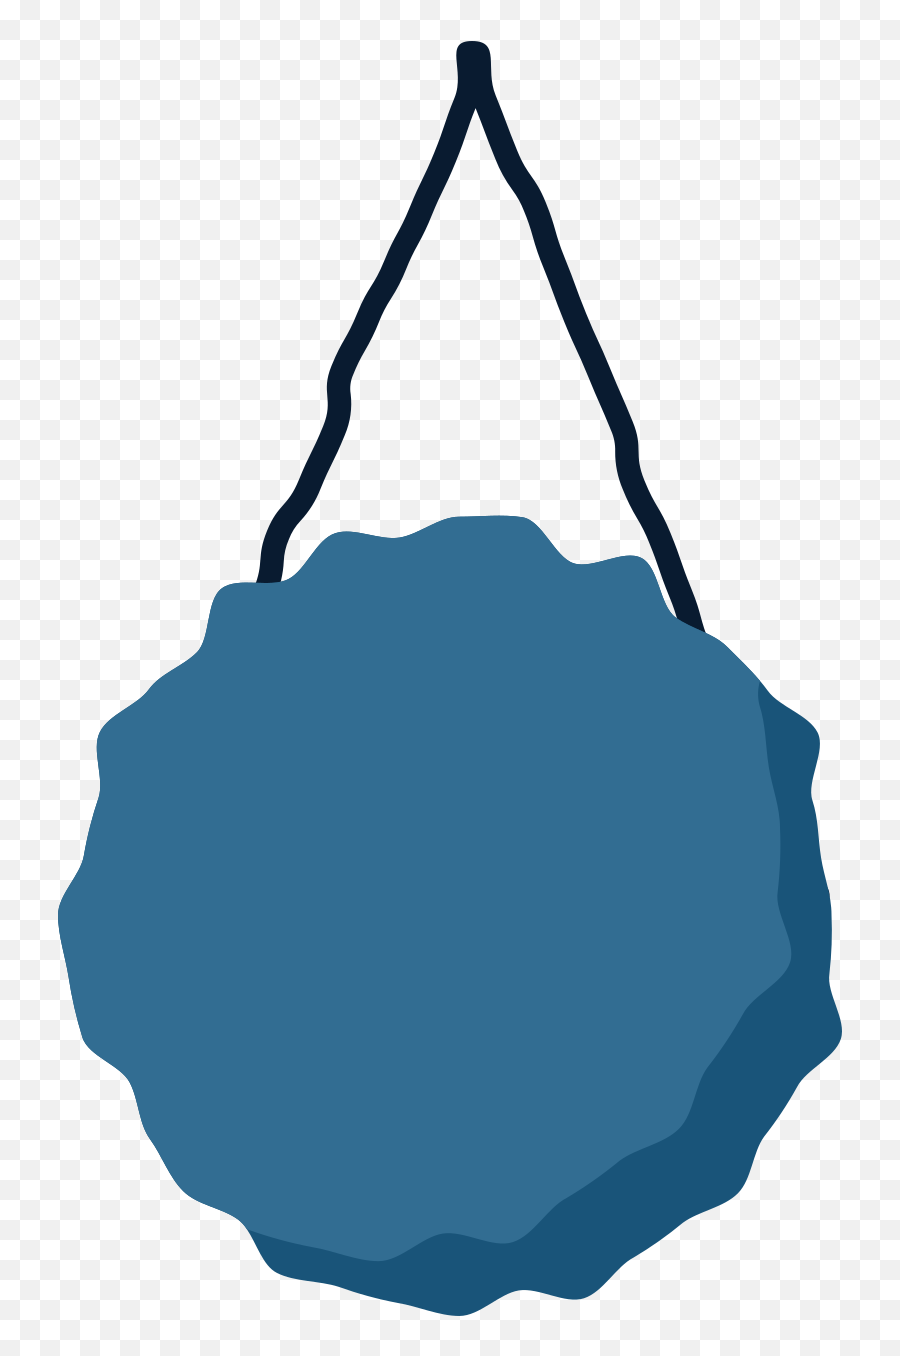 Hanging Greenery Illustration In Png Svg - Vertical,Iceberg Icon